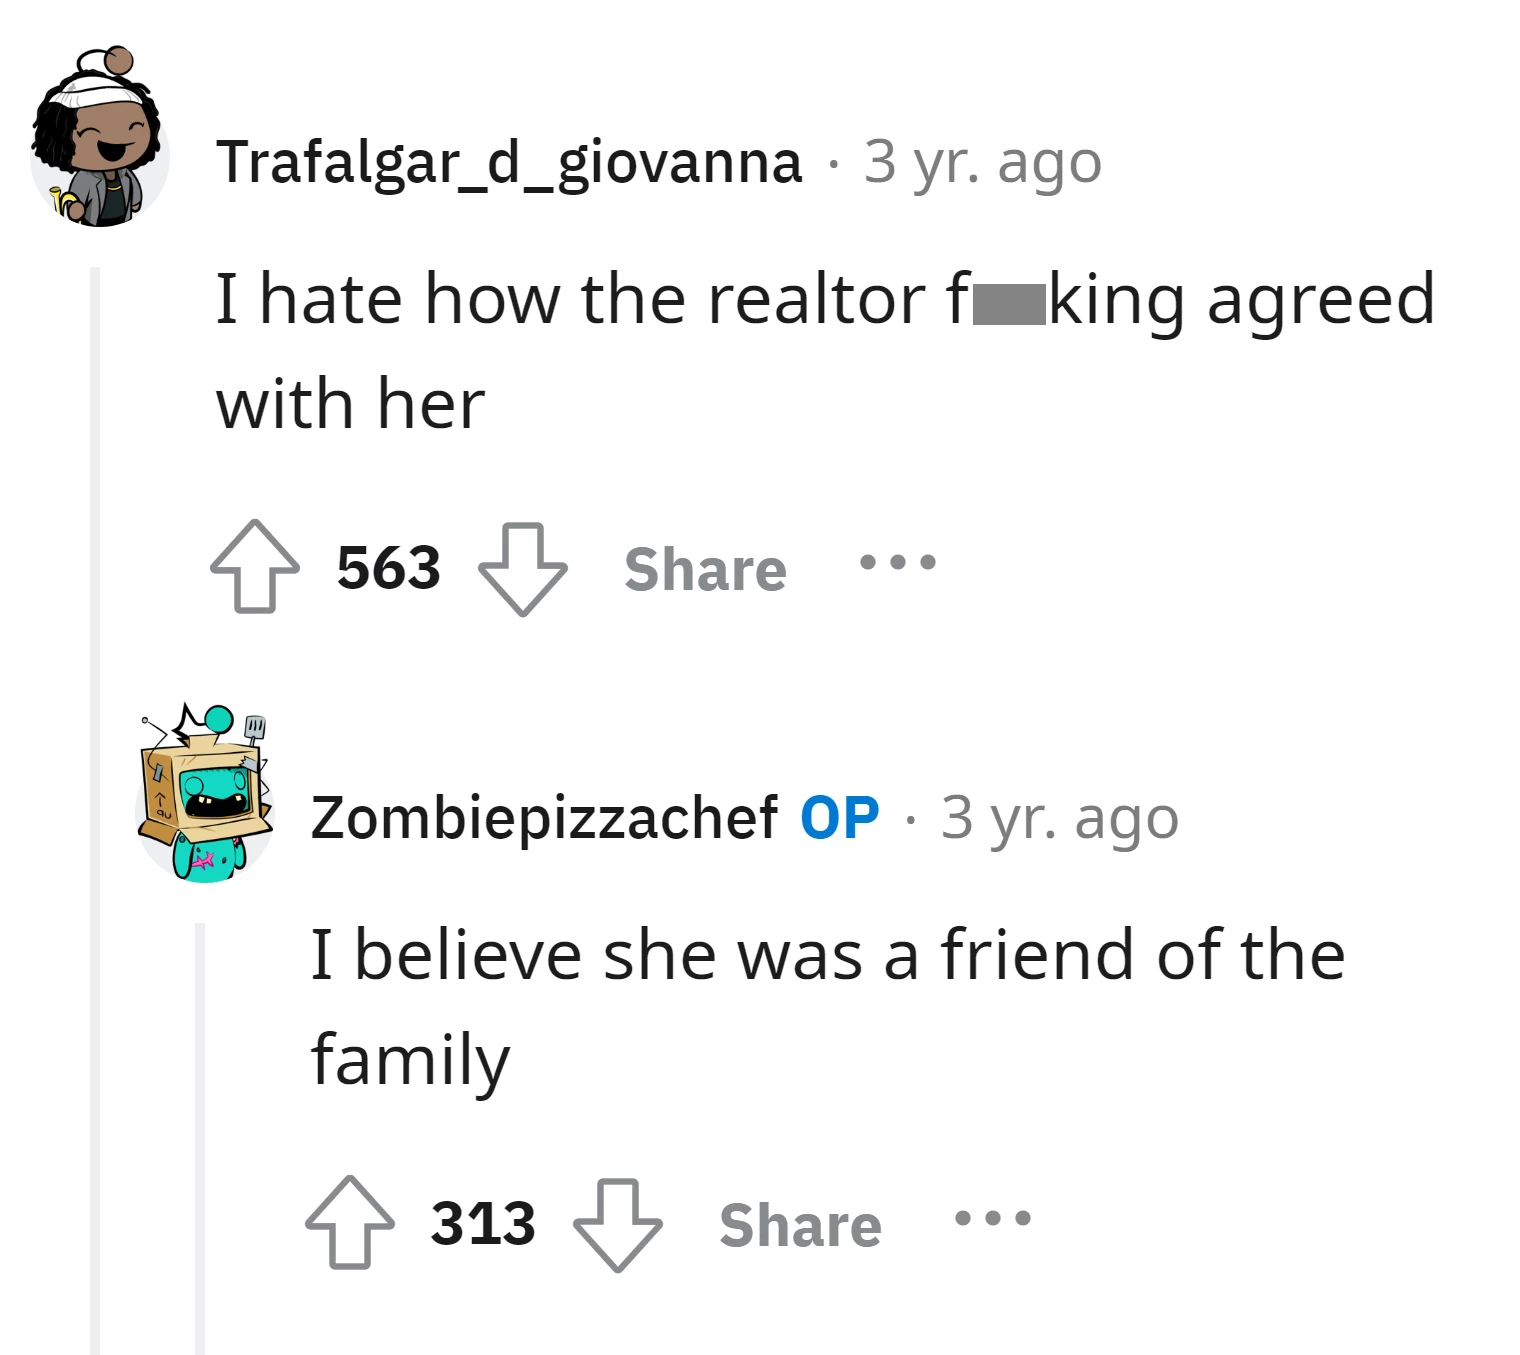 The realtor might be a friend of her family